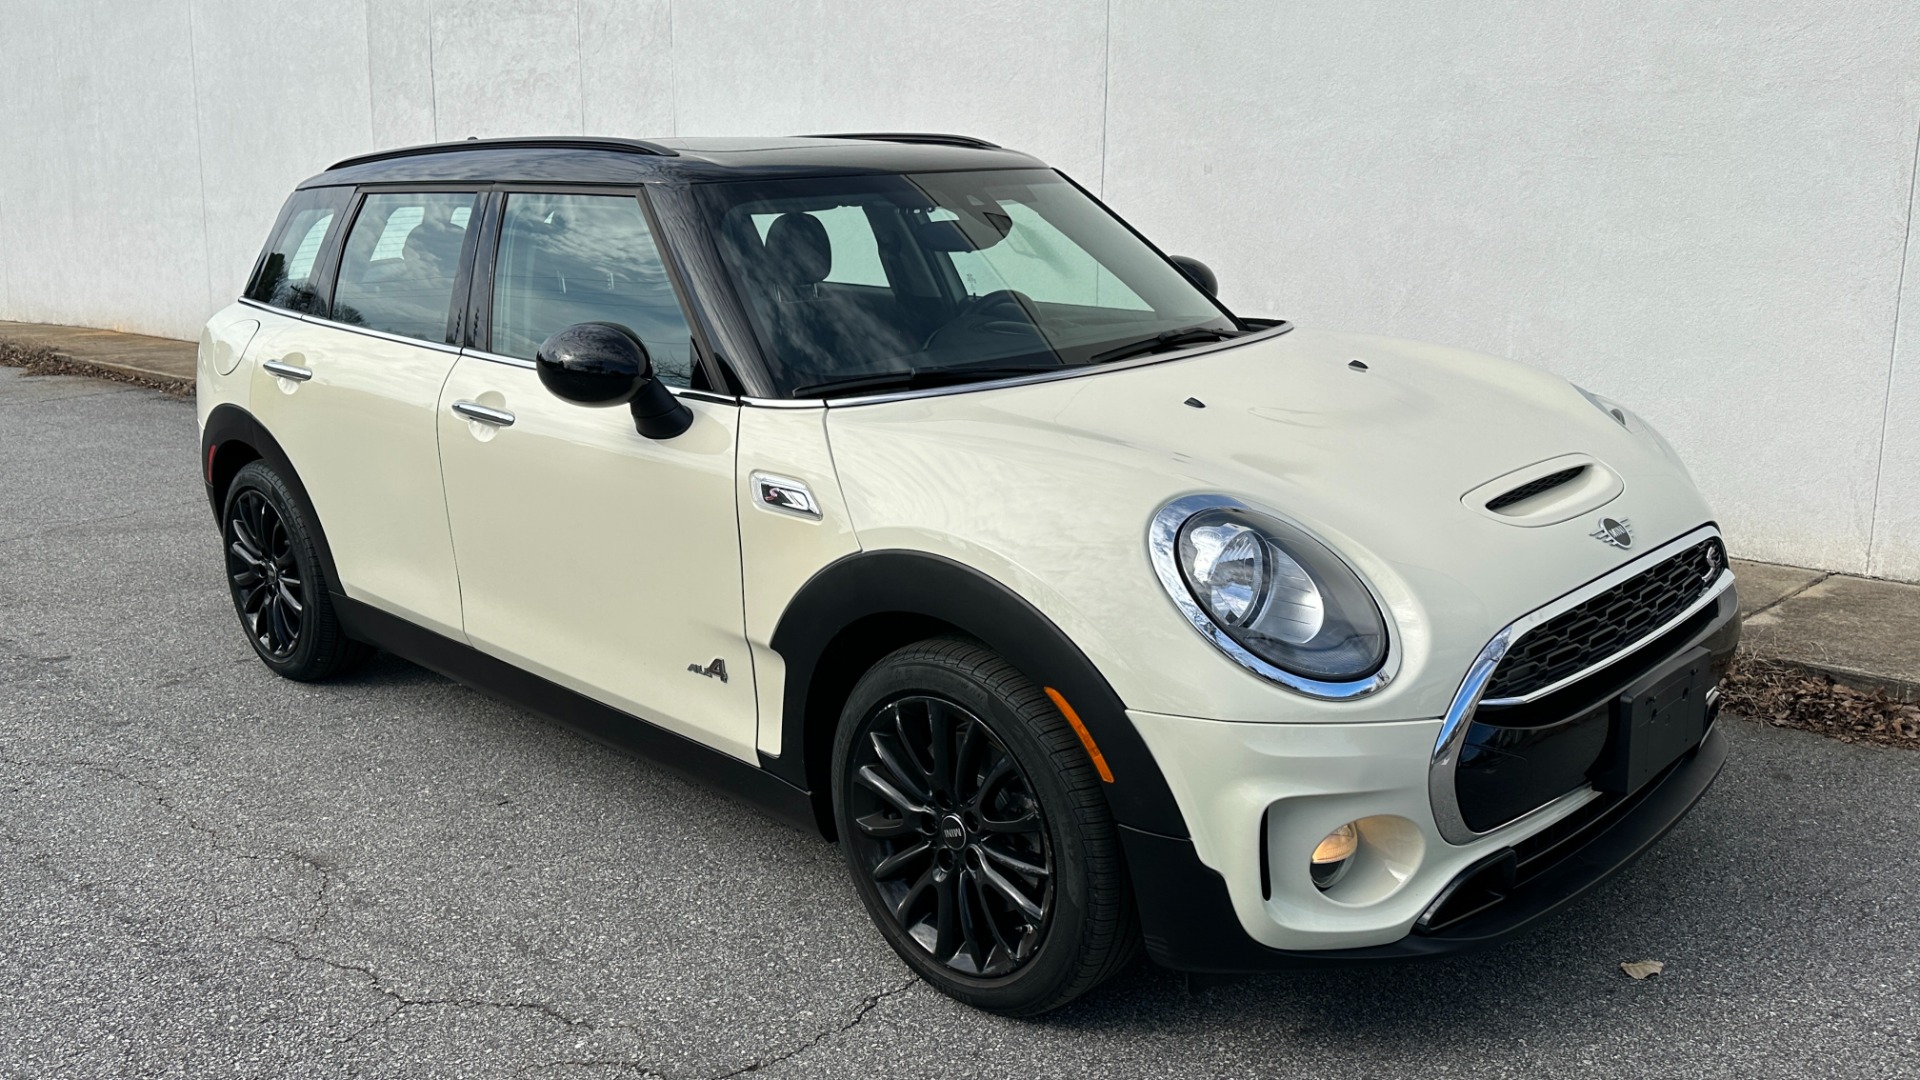 Used 2019 MINI Clubman COOPER S / NAVIGATION / ALL4 / HEATED SEATS / SPORT MODE / PADDLE SHIFTERS for sale $26,595 at Formula Imports in Charlotte NC 28227 2